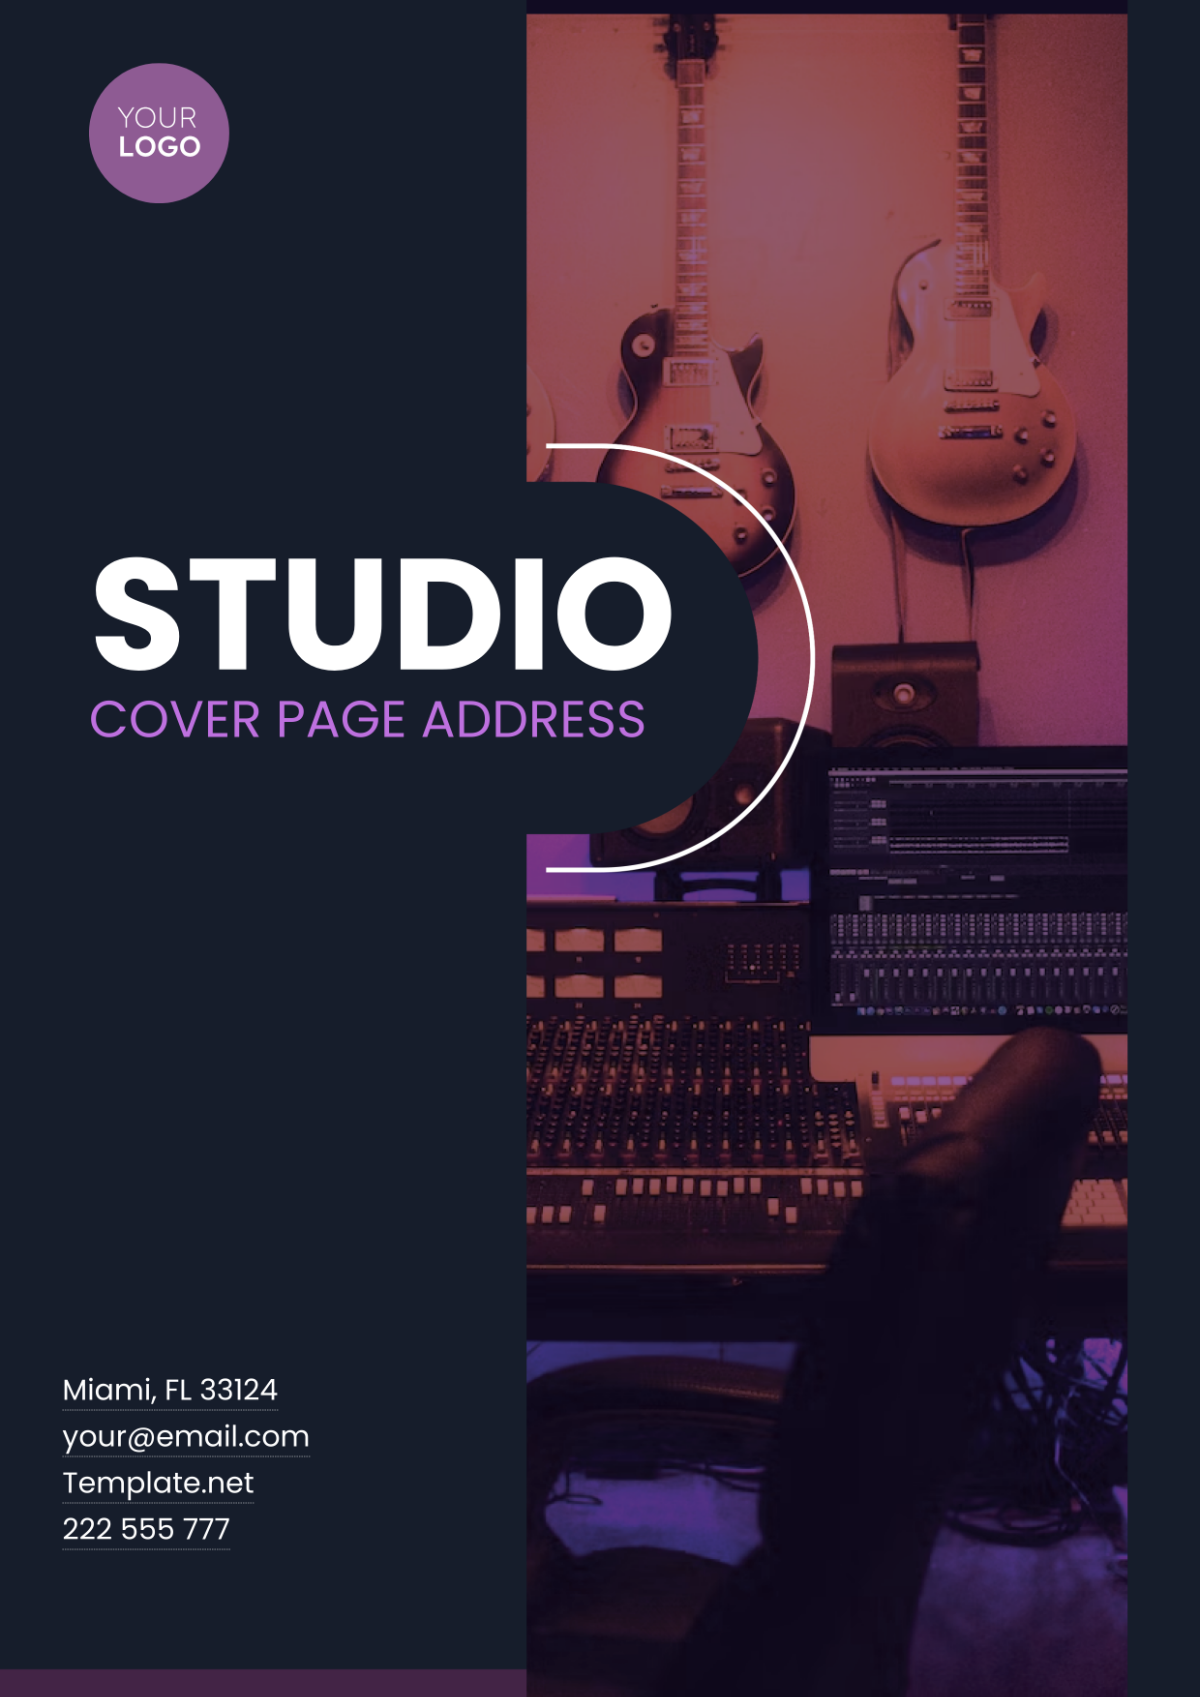 Free Studio Cover Page Address Template